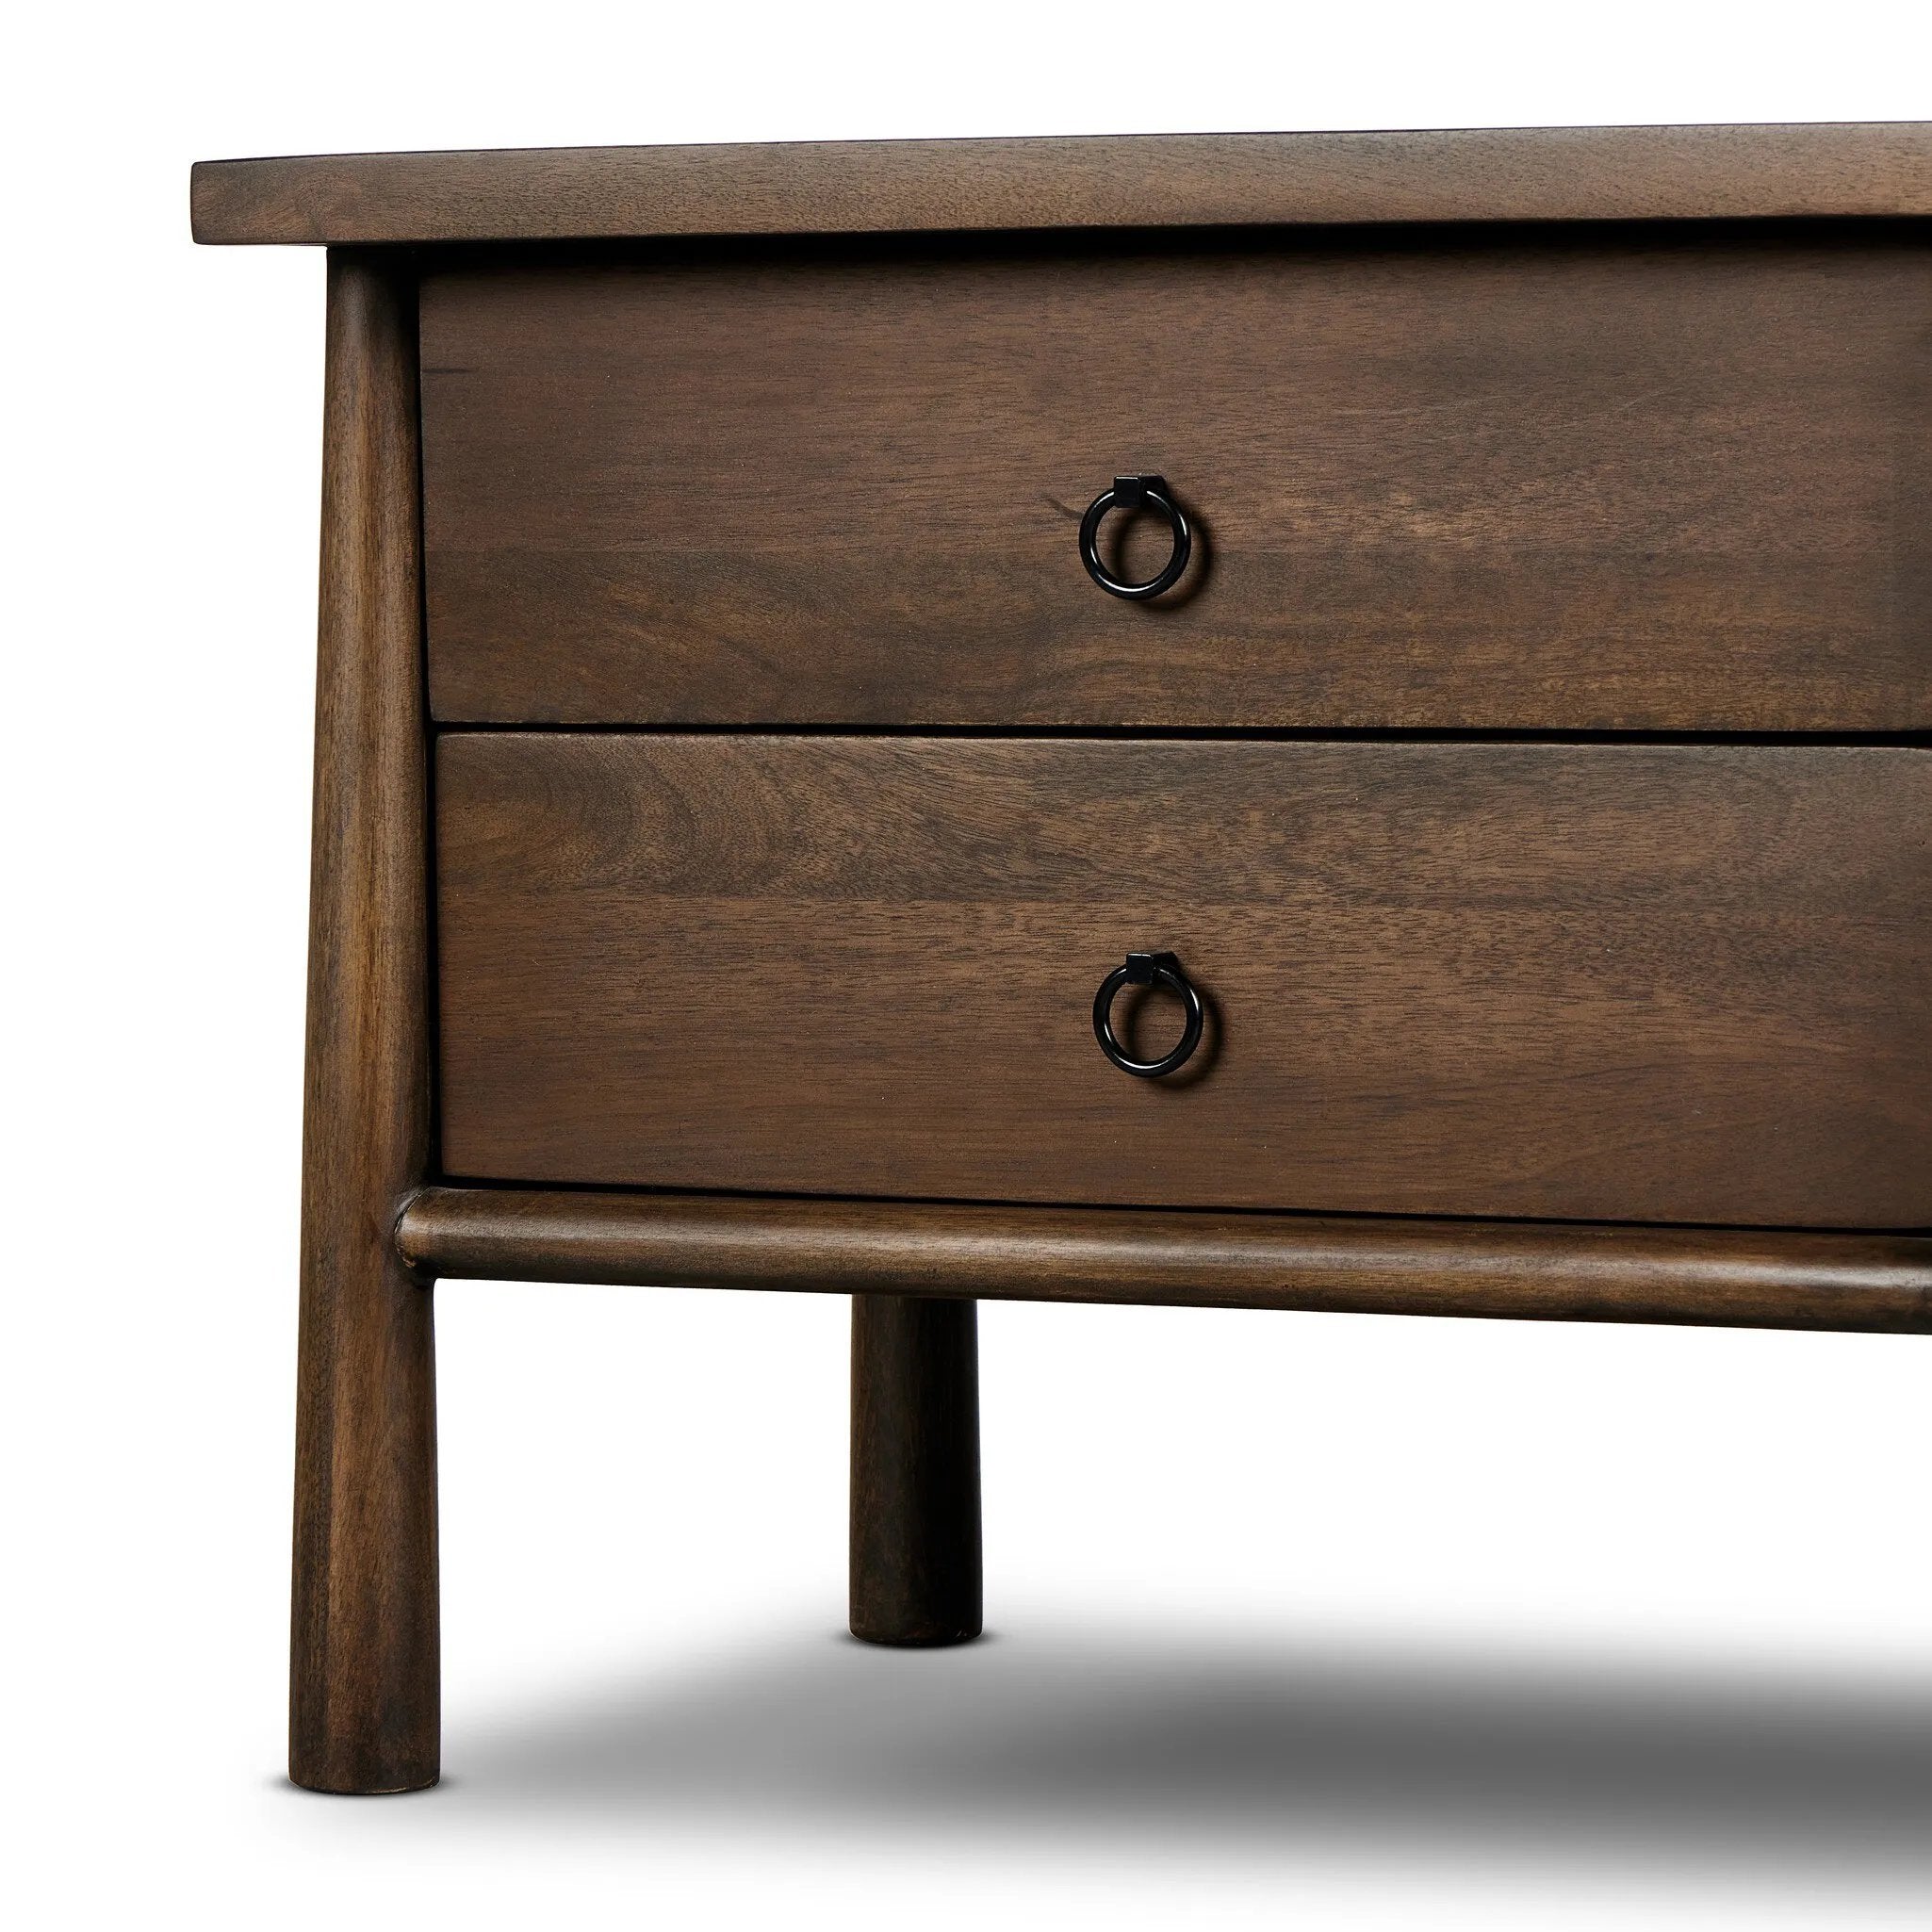 Inspired by French antique design, this dresser stands on round tapered legs with a prominent overhang top. Made of mango wood with cast iron key ring pulls, two drawers make it a versatile choice as a dresser or nightstand.Collection: May Amethyst Home provides interior design, new home construction design consulting, vintage area rugs, and lighting in the Seattle metro area.